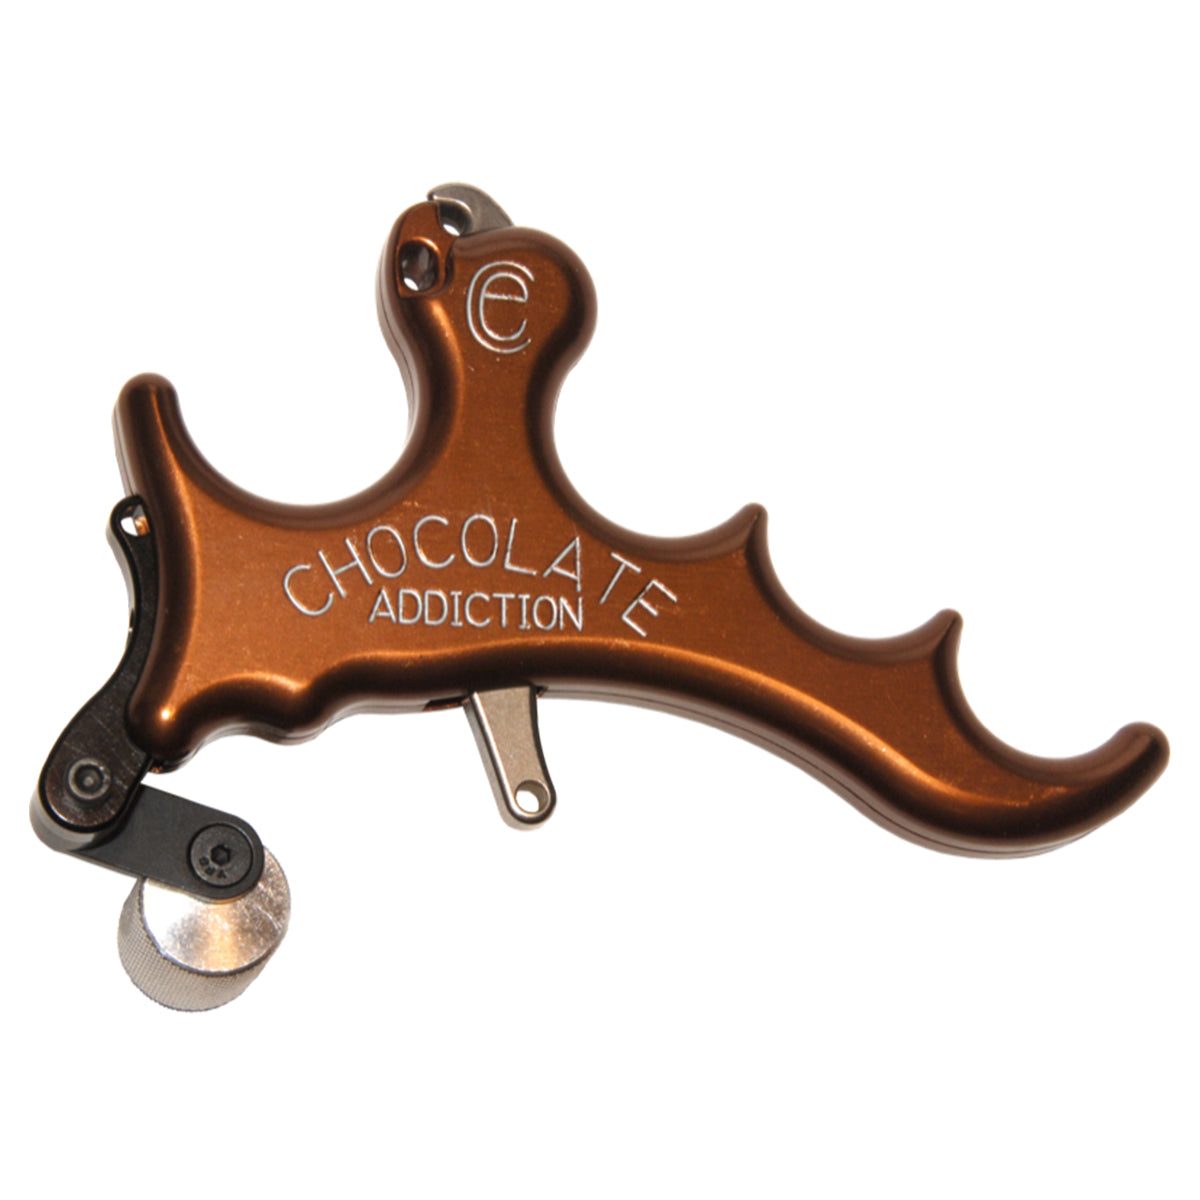 Carter Chocolate Addiction 4 Finger Release in Carter Chocolate Addiction 4 Finger Release by Carter Releases | Archery - goHUNT Shop by GOHUNT | Carter Releases - GOHUNT Shop